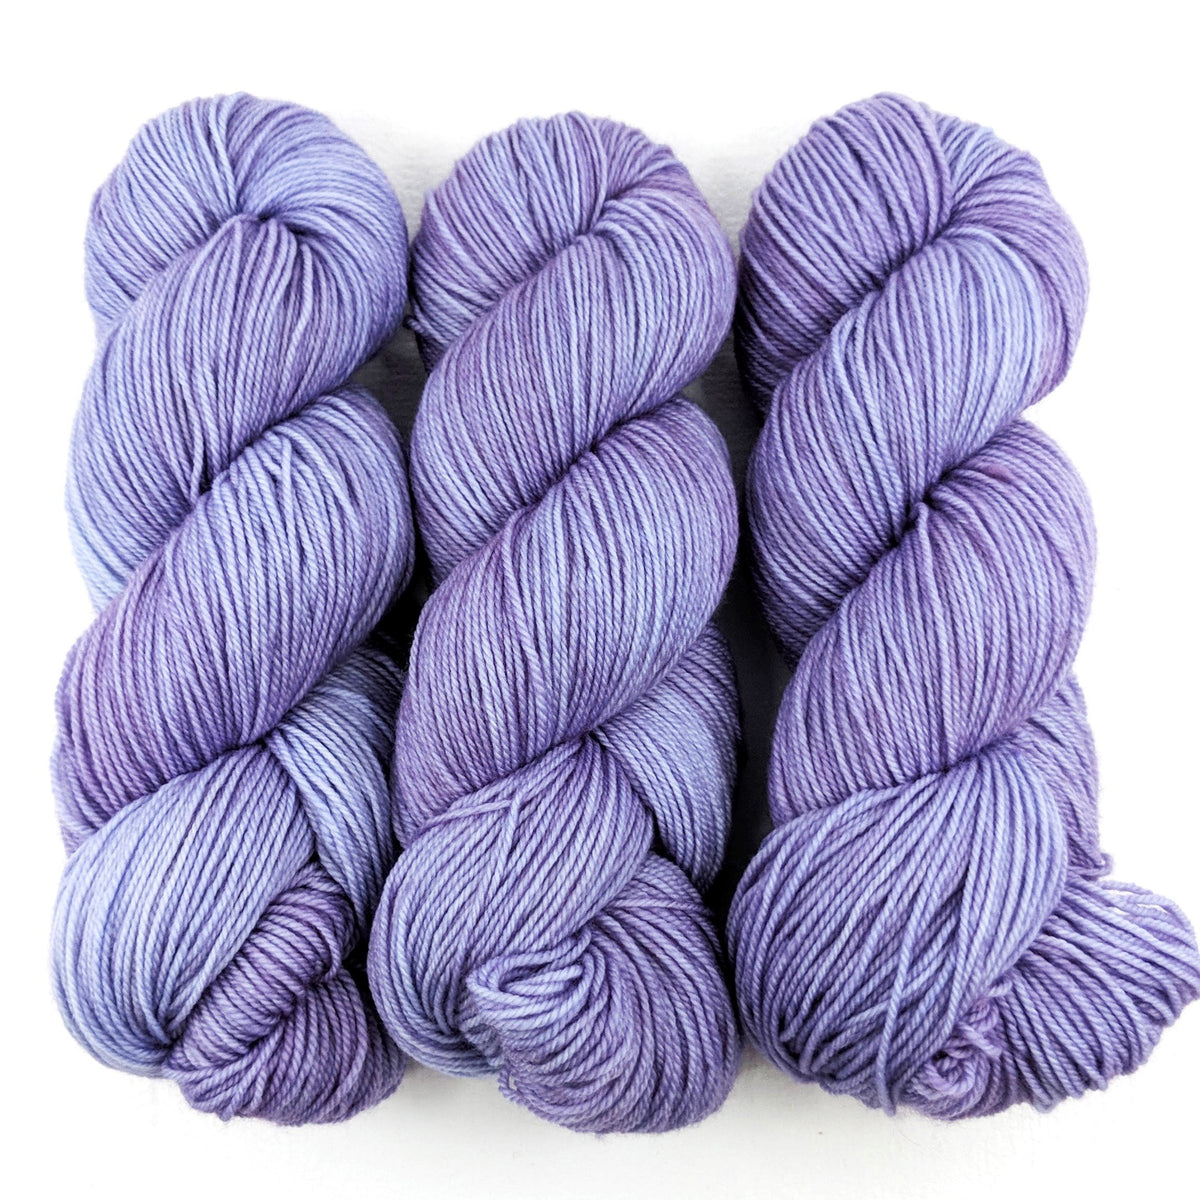 English Lavender in Worsted Weight